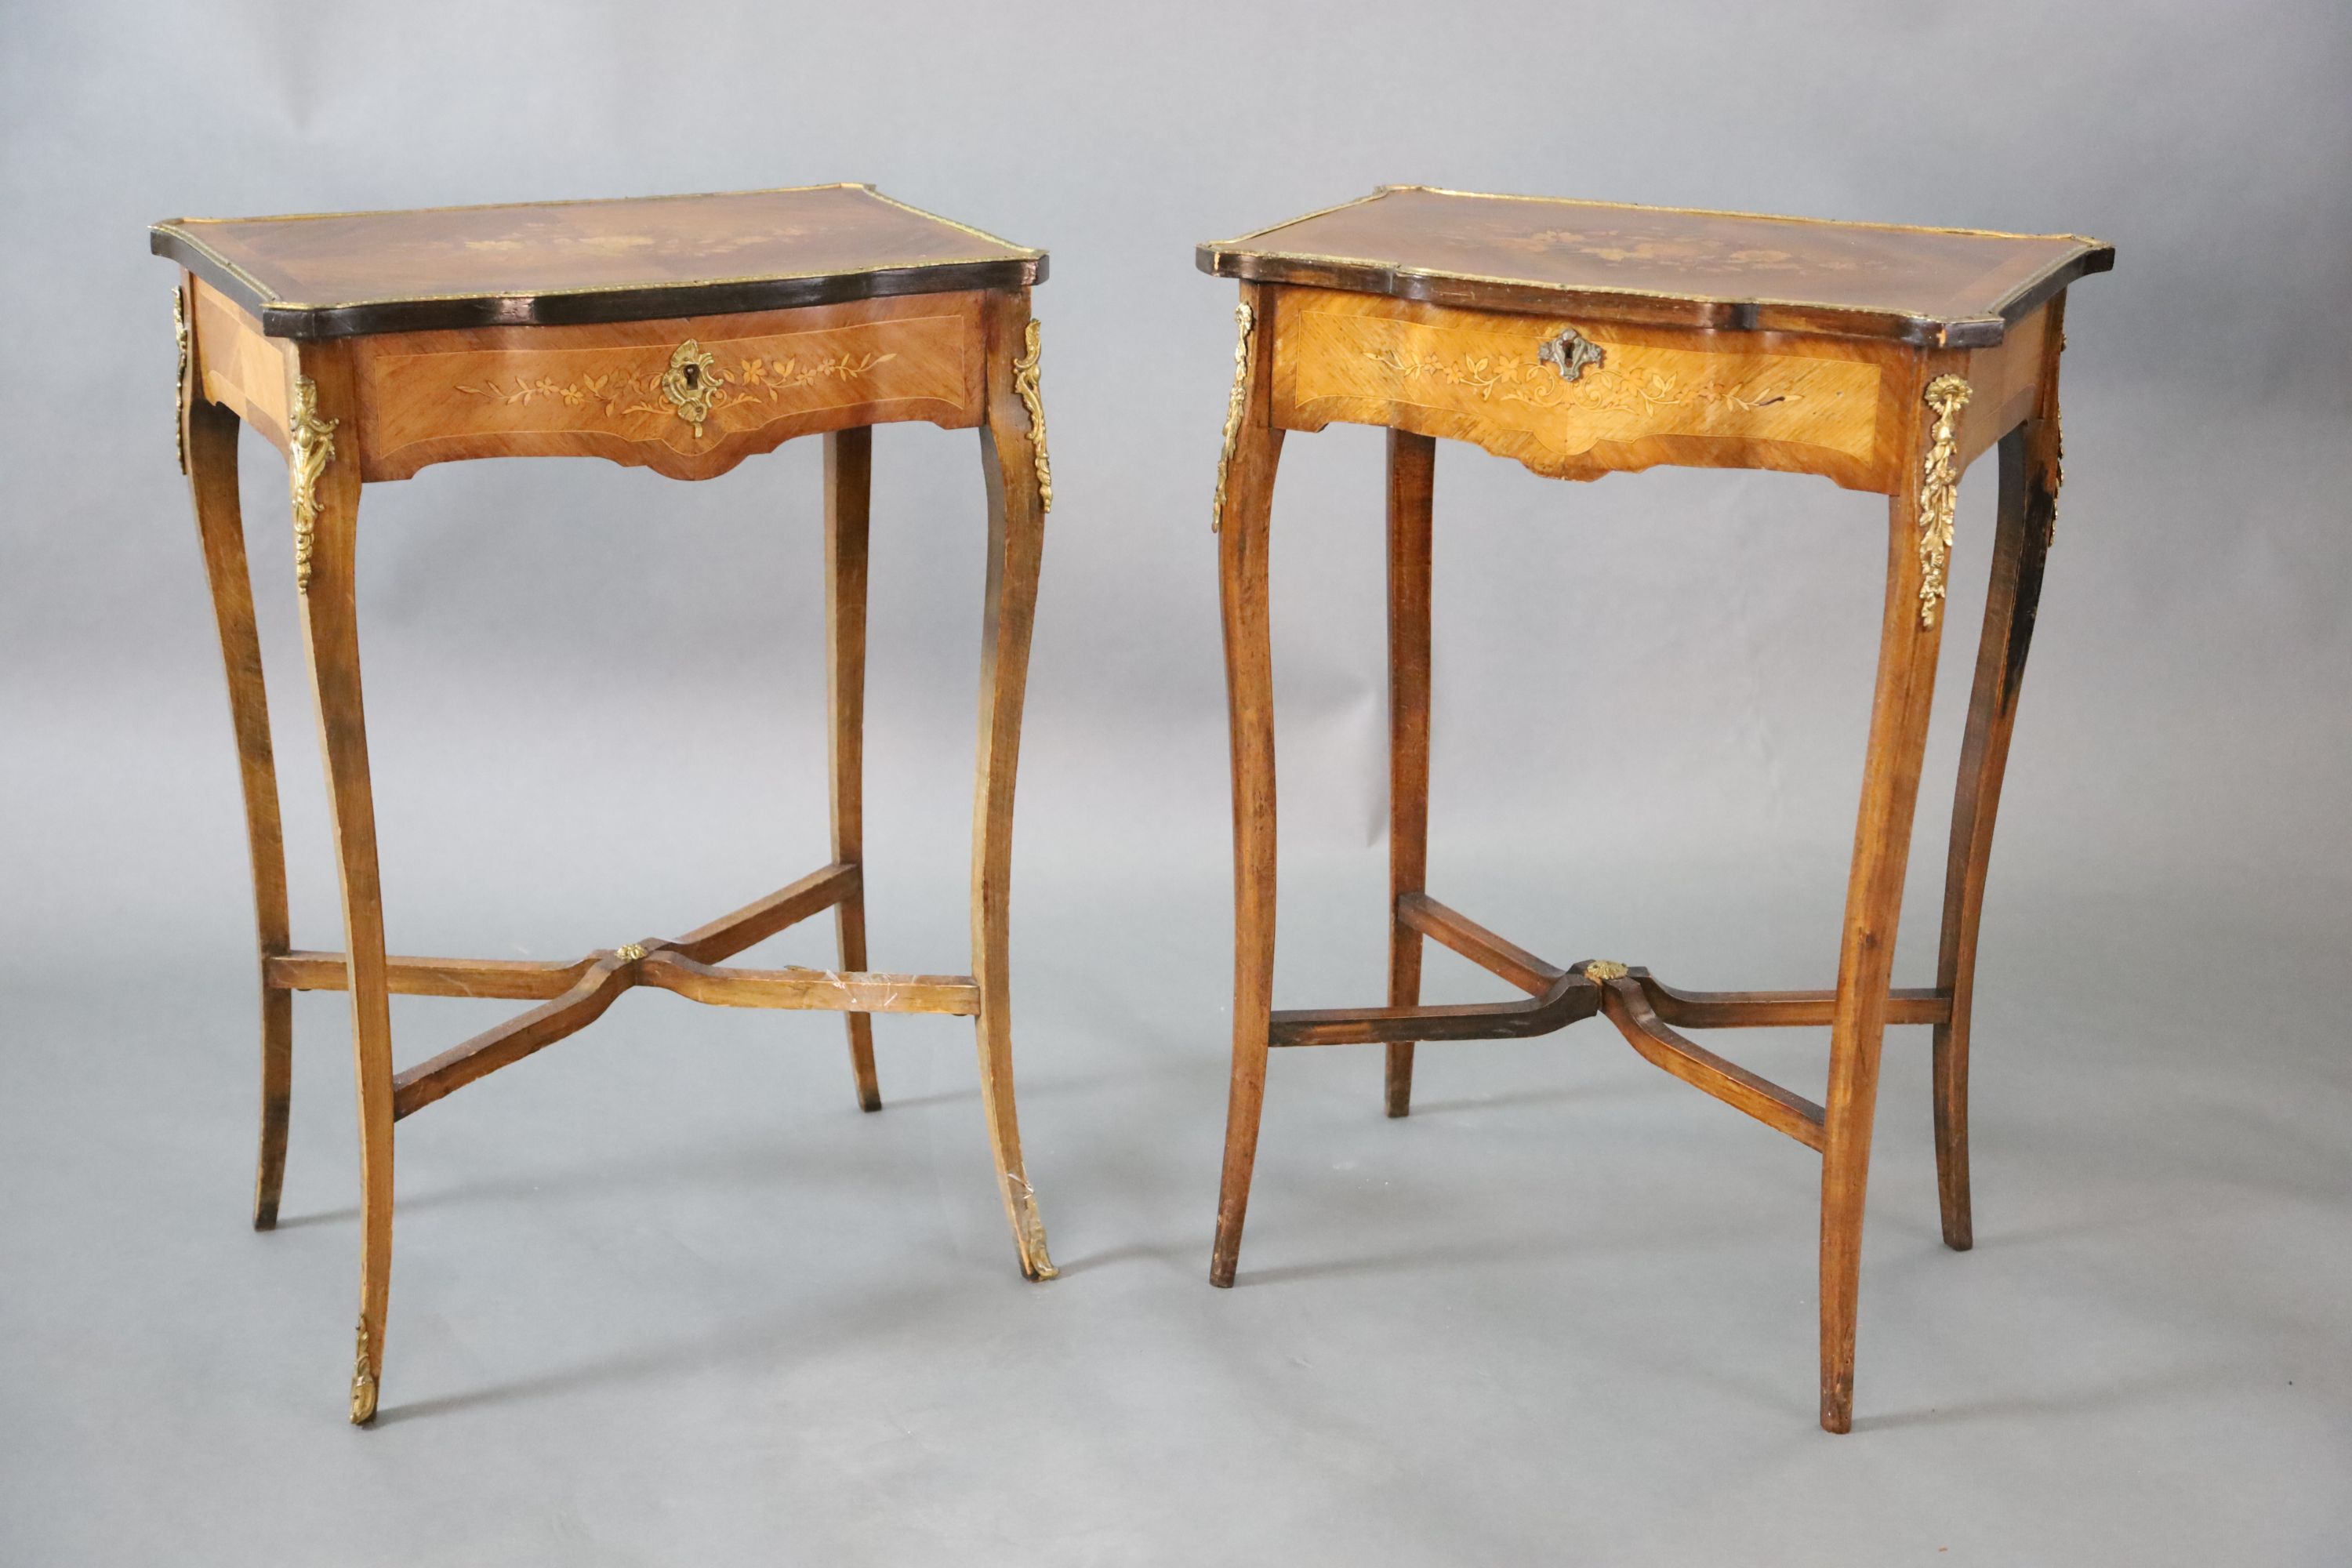 A pair of Louis XVI style ormolu mounted marquetry work tables, W.1ft 9in. D.1ft 3in. H.2ft 6in.